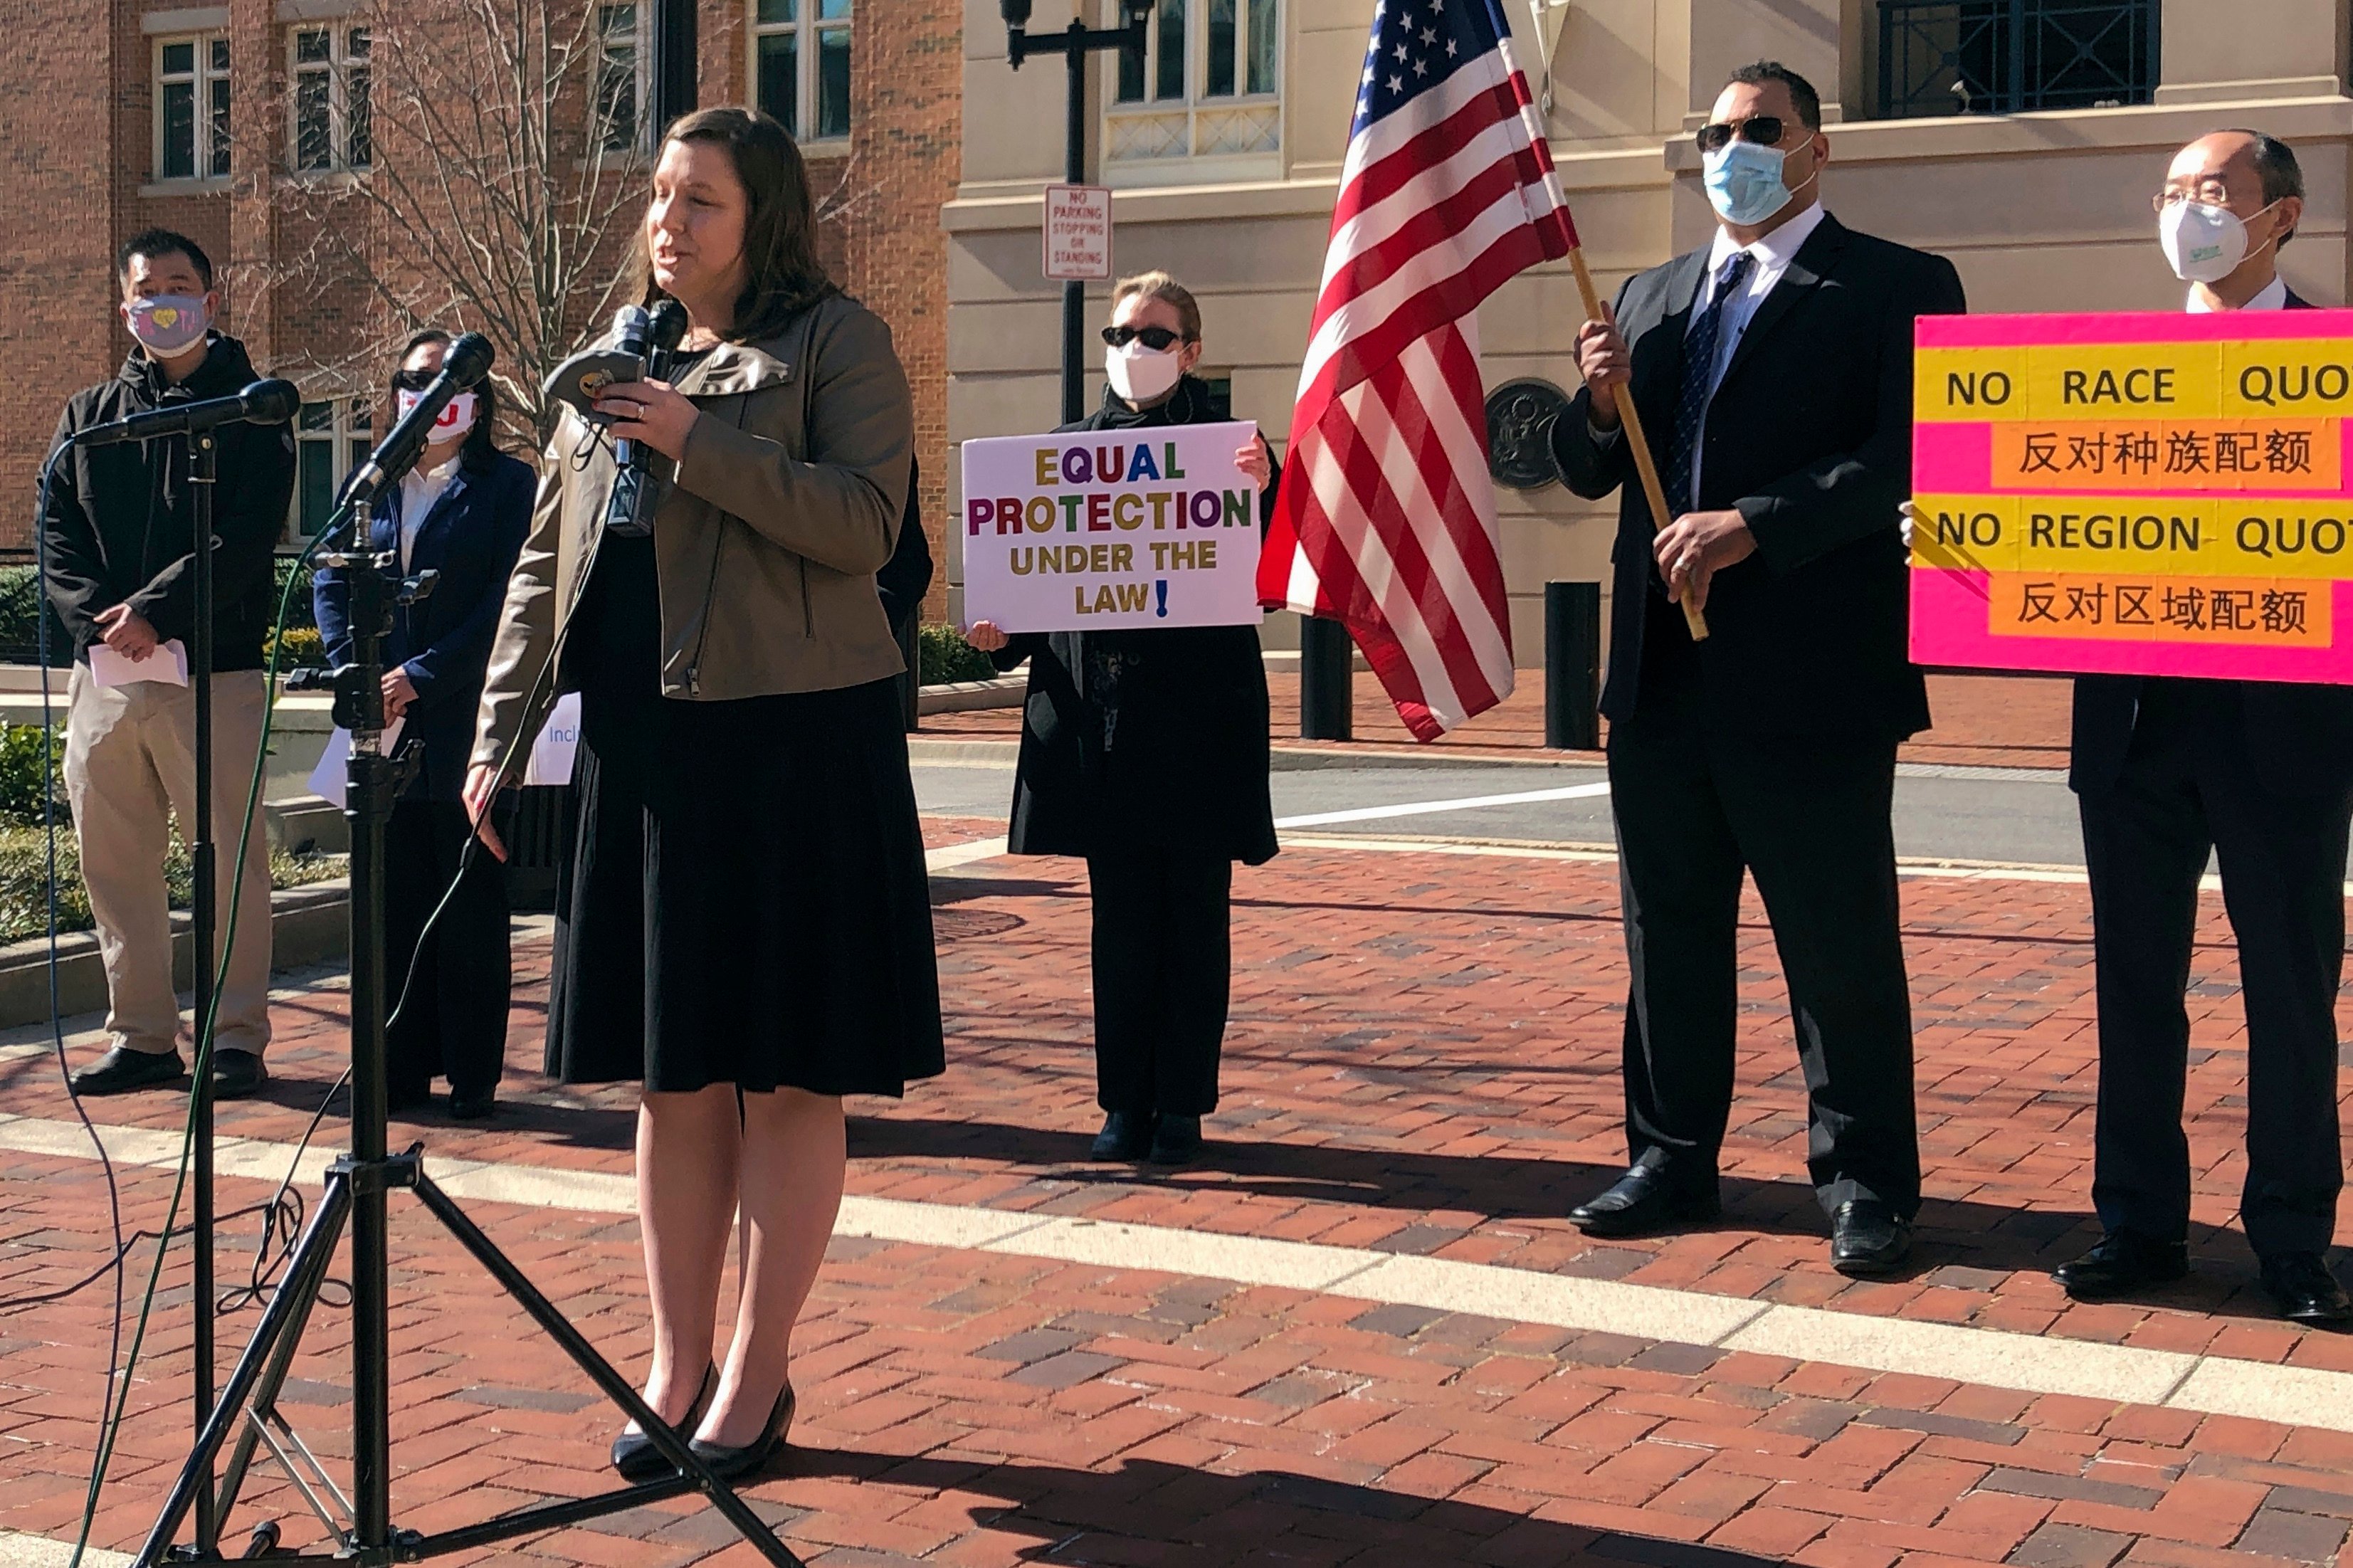 Pacific Legal Foundation lawyer Erin Wilcox speaks at a news conference in March 2021 outside the federal courthouse in Alexandria, Virginia, where her organisation filed a lawsuit against Fairfax County’s school board, alleging discrimination against Asian-Americans over its revised admissions process for the elite Thomas Jefferson High School for Science and Technology. Photo: AP